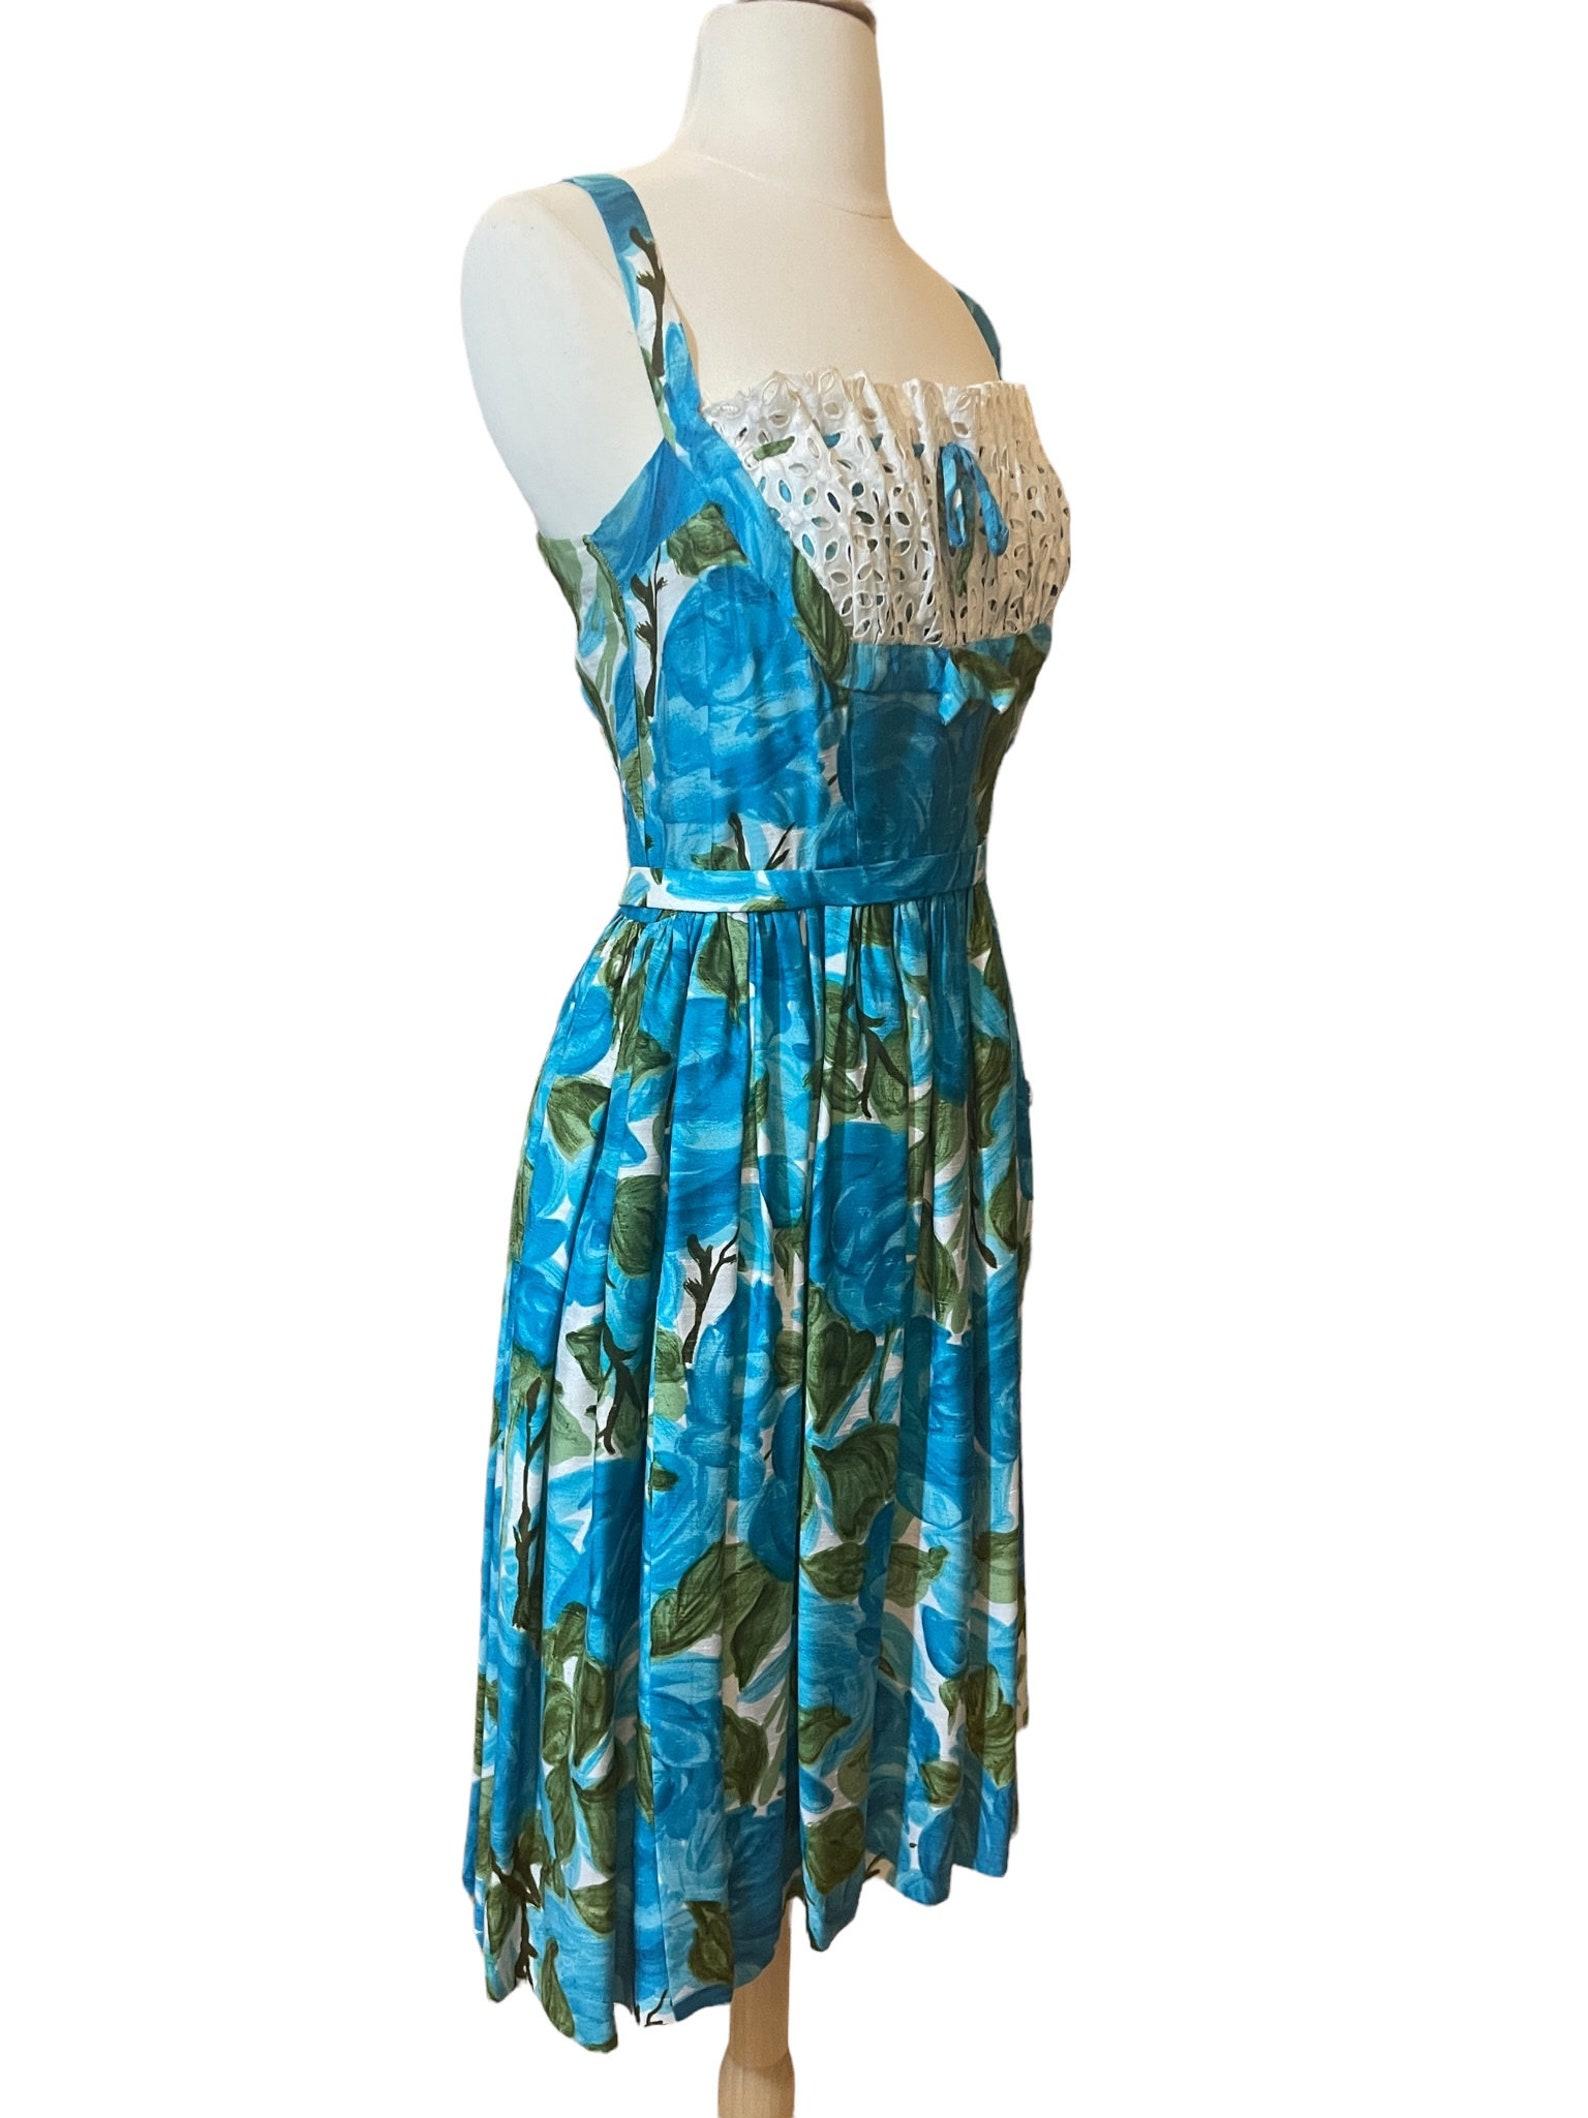 Women's Blue and Green Watercolor Floral Sun Dress, Circa 1950s For Sale